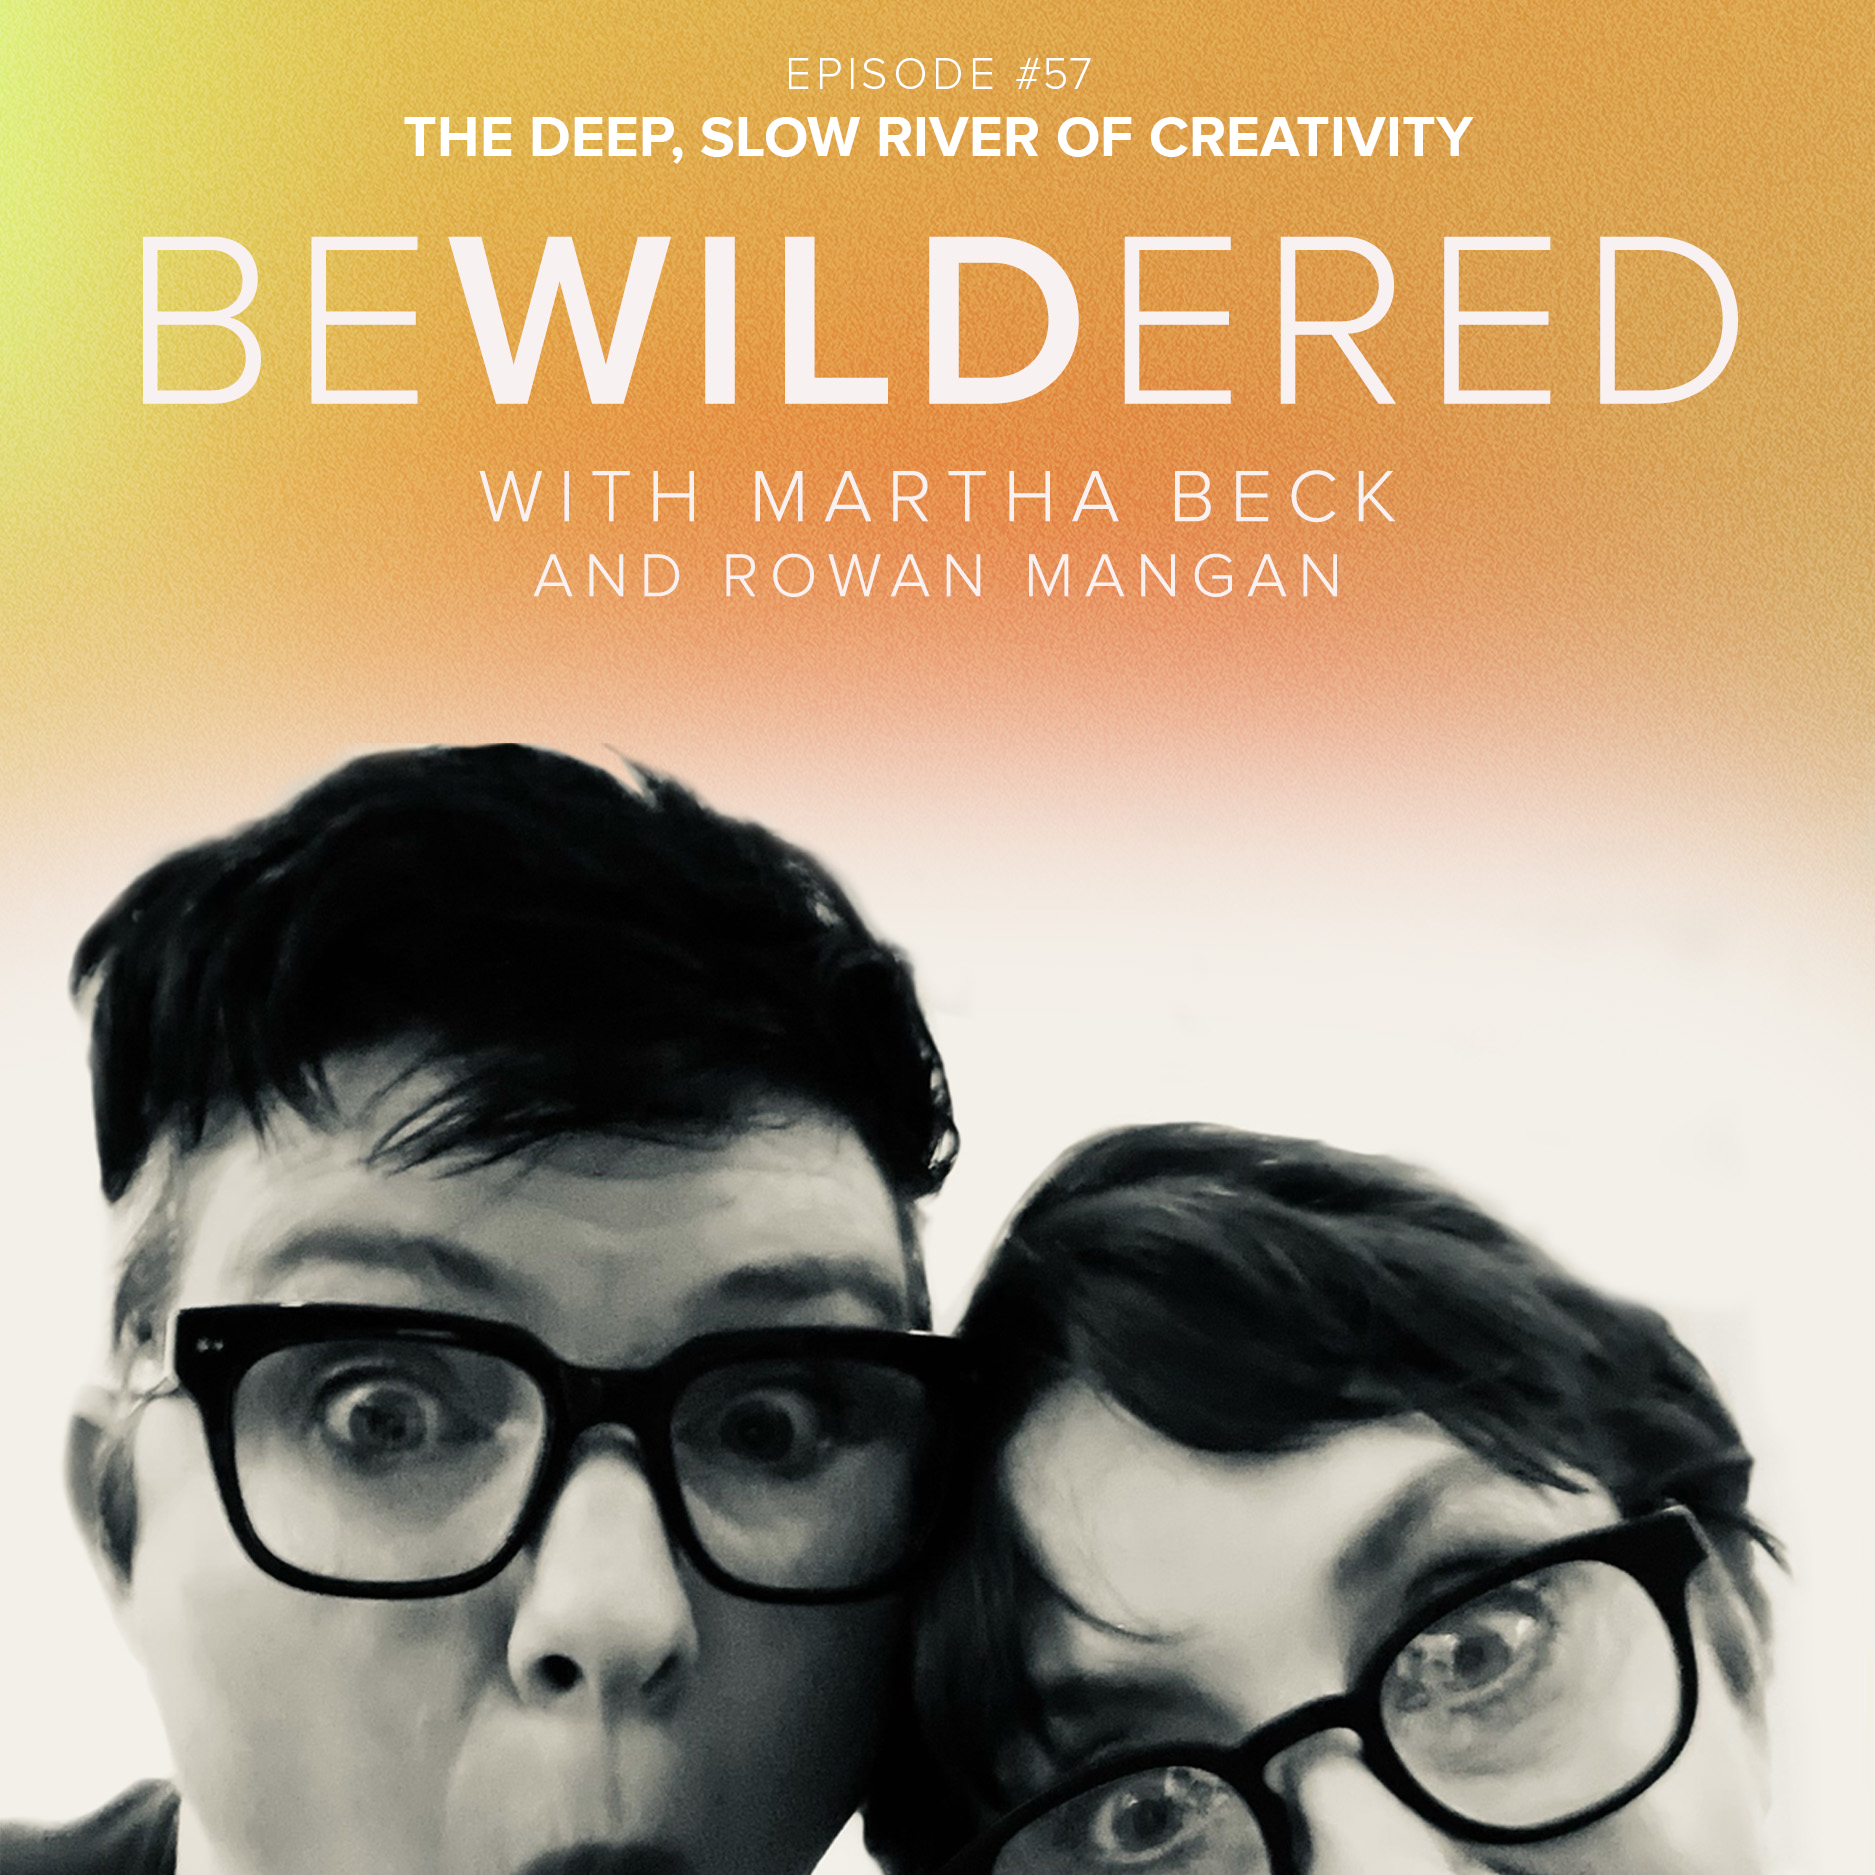 Image for Episode #57 The Deep, Slow River of Creativity for the Bewildered Podcast with Martha Beck and Rowan Mangan